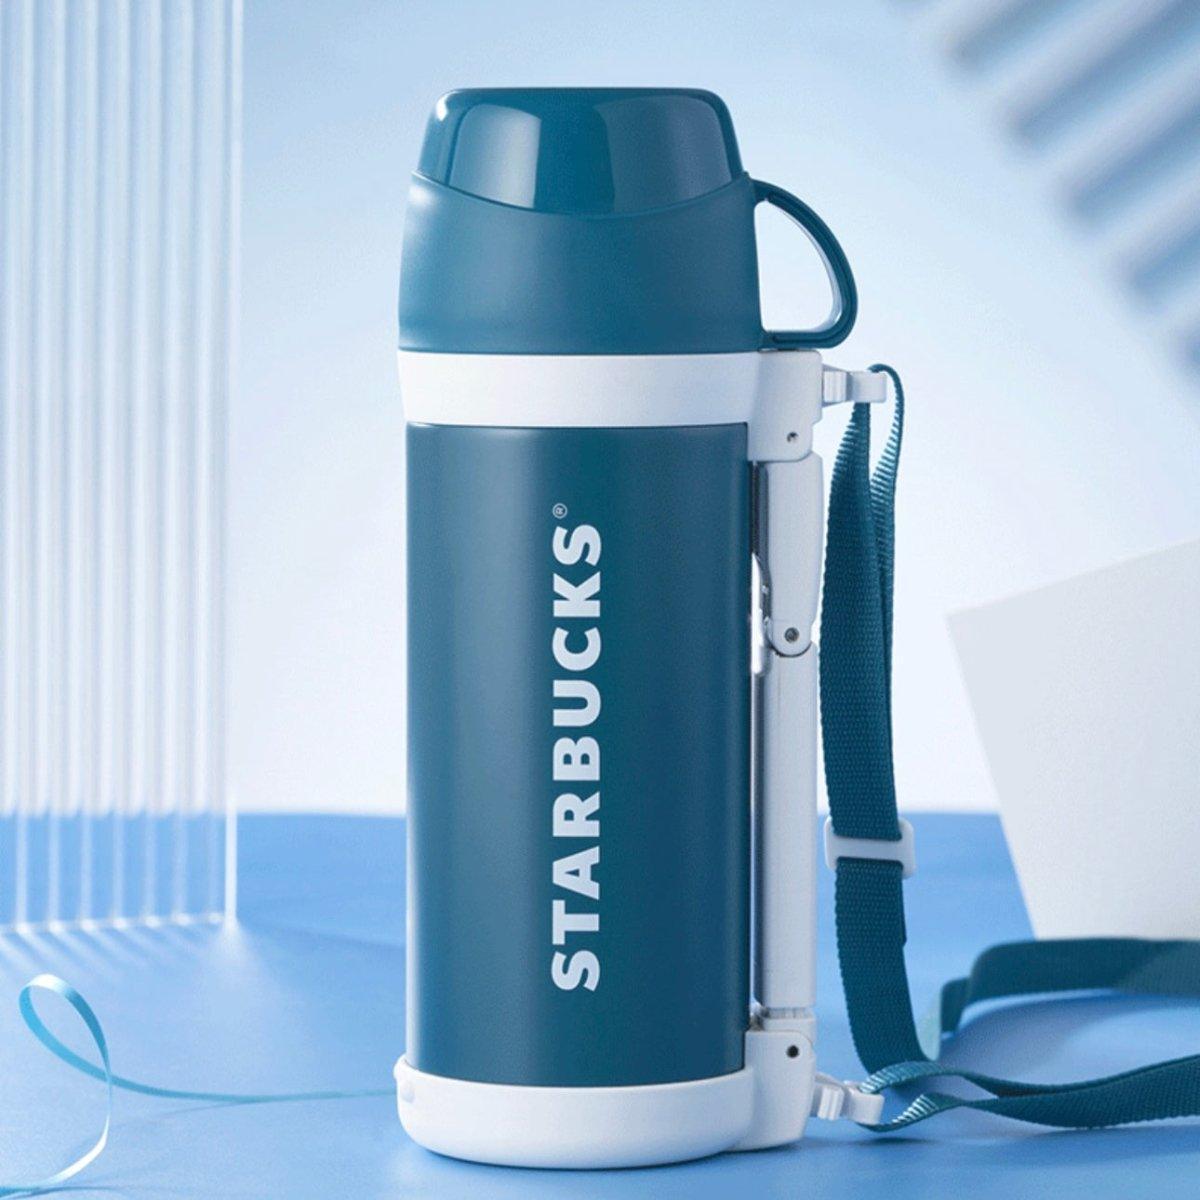 Starbucks 1L/34oz Blue Magician Classic Thermos with Cup and Strap - Ann Ann Starbucks